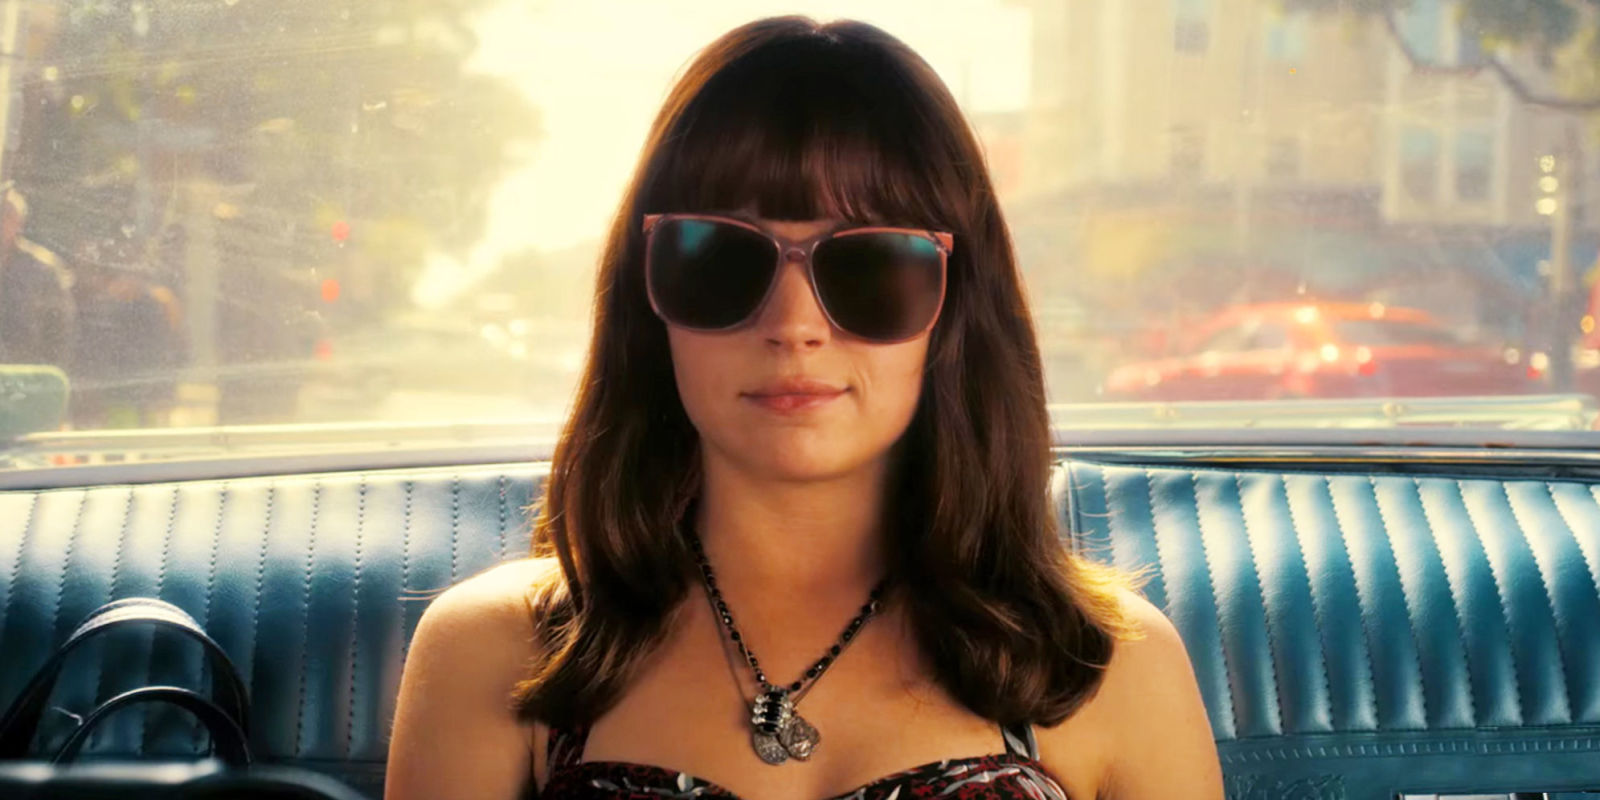 Britt Robertson sits in the back of a car while wearing sunglasses in a scene from Girlboss